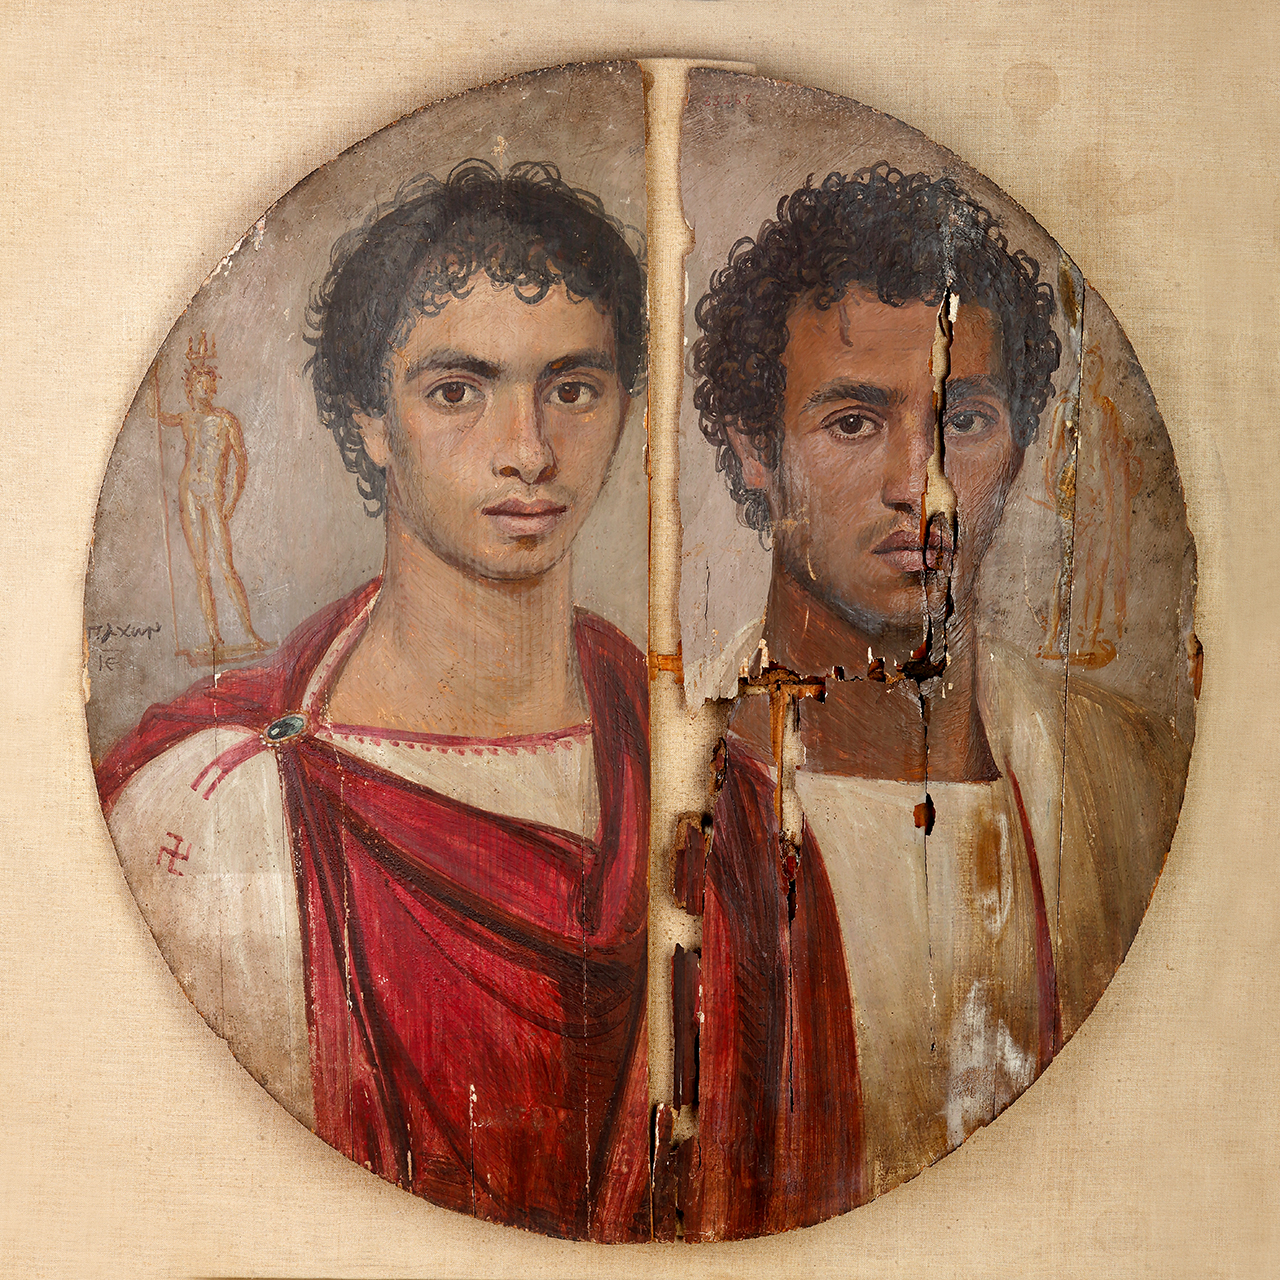 Tondo of Two Brothers, c. 140 C.E., encaustic paint on wood, 61 cm diameter (Egyptian Museum, Cairo). Excavated in 1898–99 at Antinoöpolis, Egypt